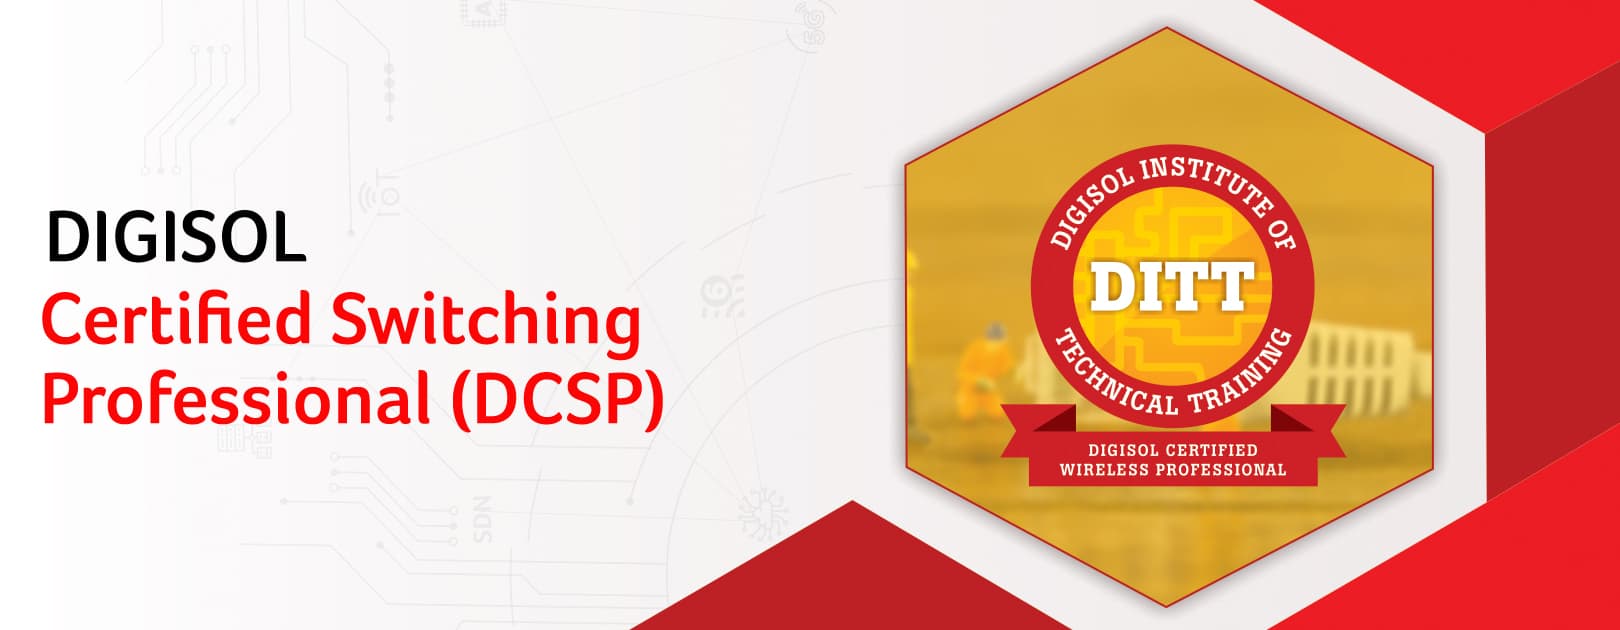 Digisol Certified Switching professional (DCSP) is course program to enhance the engineer’s knowledge on the technical aspects of network switching technologies and their types. Additional to the theoretical understanding, the program will also include the practical understanding on the Digisol switch device configurations. The Program benefits are as listed below :  1. Provide hands-on experience on DIGISOL switching products. 2. Enable participants with in depth knowledge on the technical aspects of switching technologies and types of switches. 3. Provide training to configure DIGISOL Switching products. Certification Validity : One year